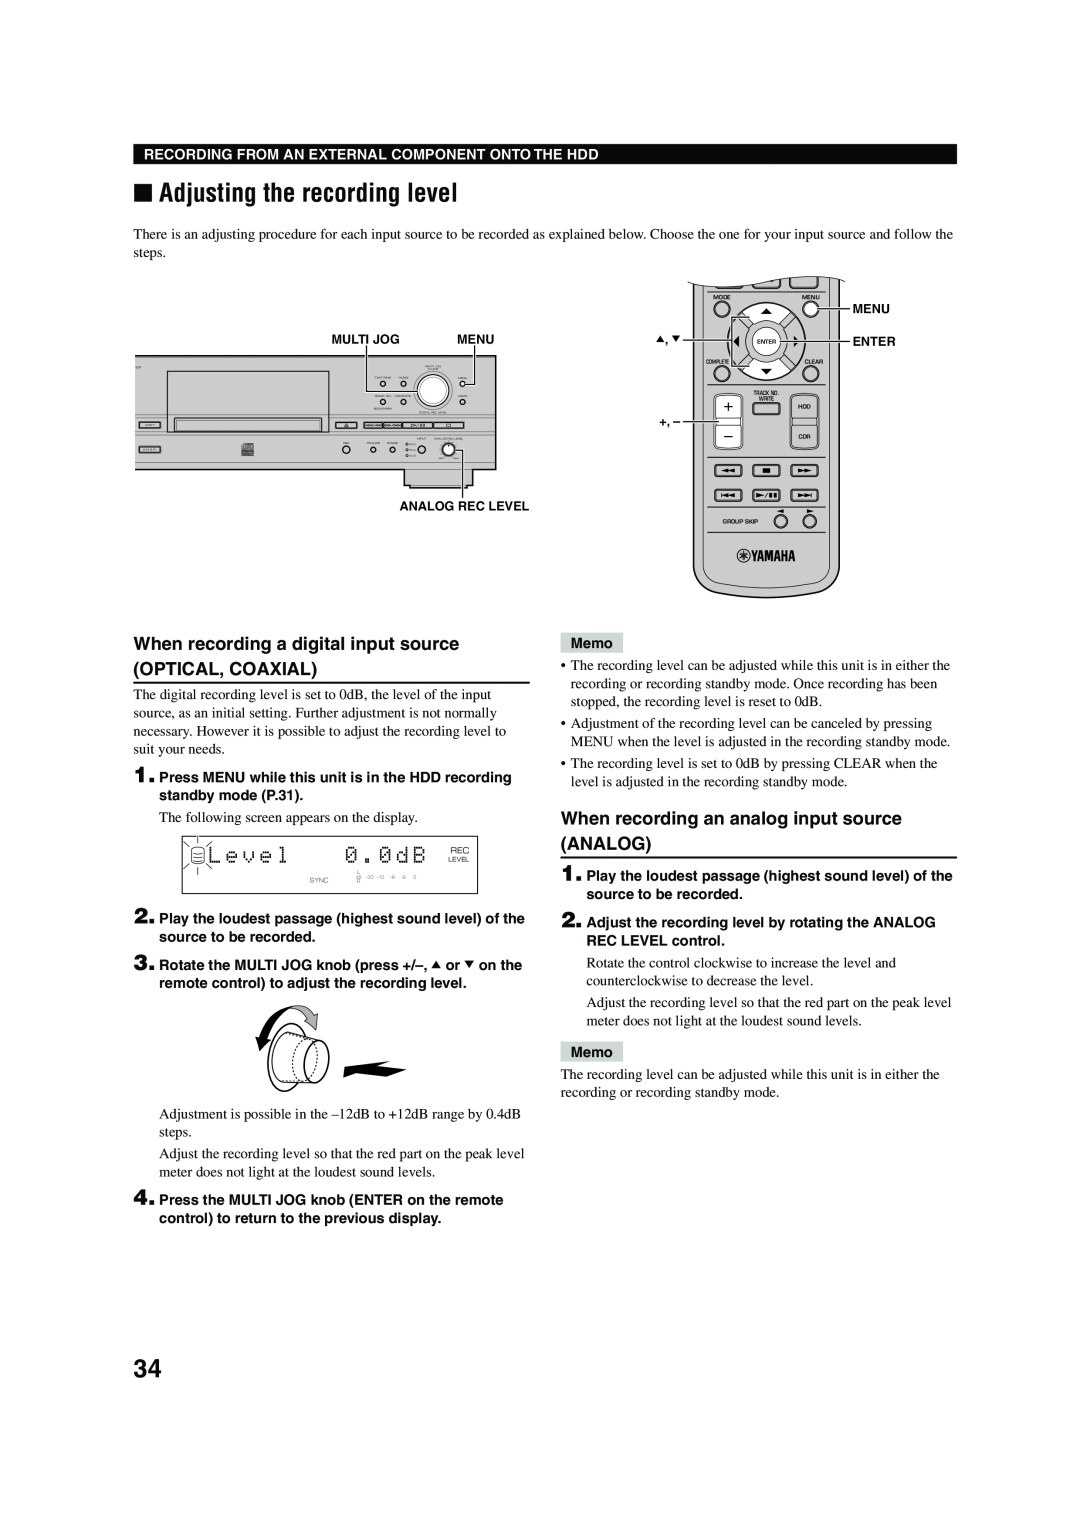 Yamaha CDR-HD 1500 owner manual Adjusting the recording level, When recording a digital input source, Optical, Coaxial 